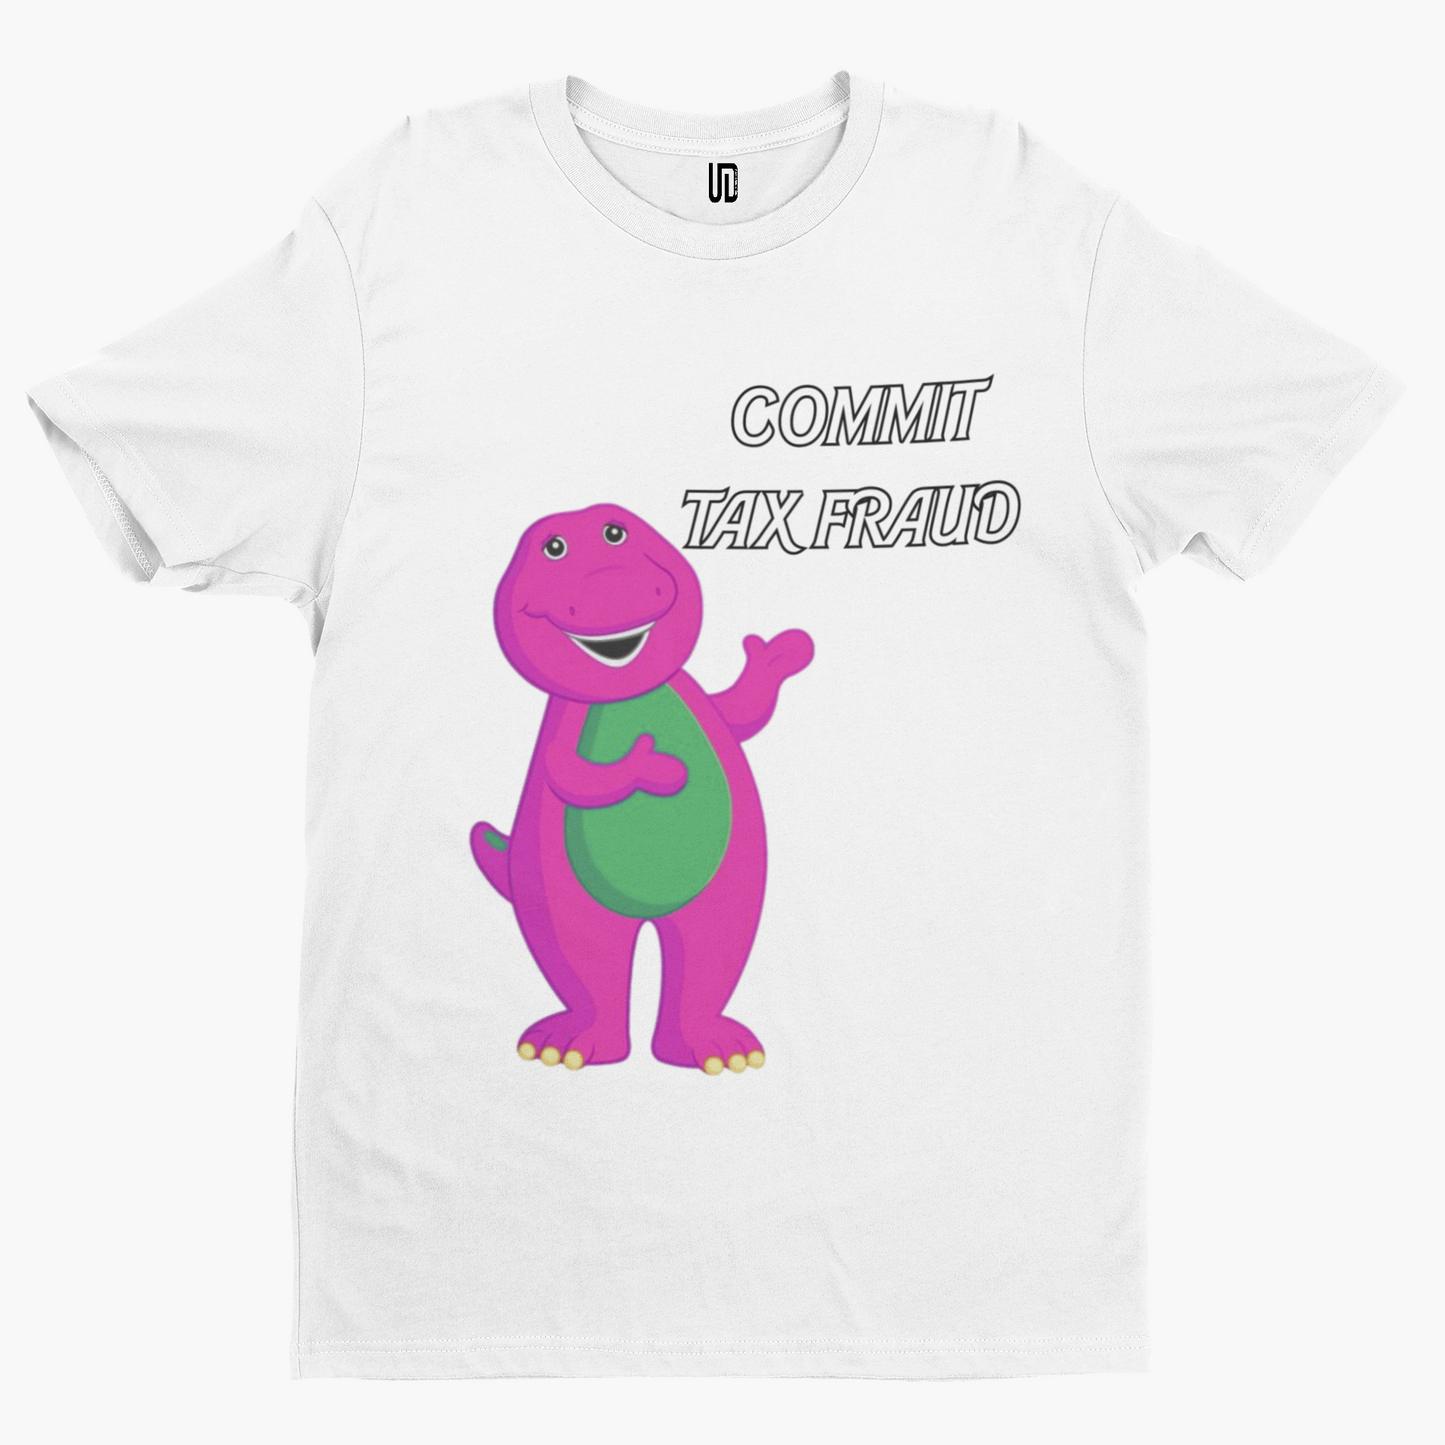 Barney Commit Tax Fraud T-Shirt -Comedy Funny Gift Film Movie TV